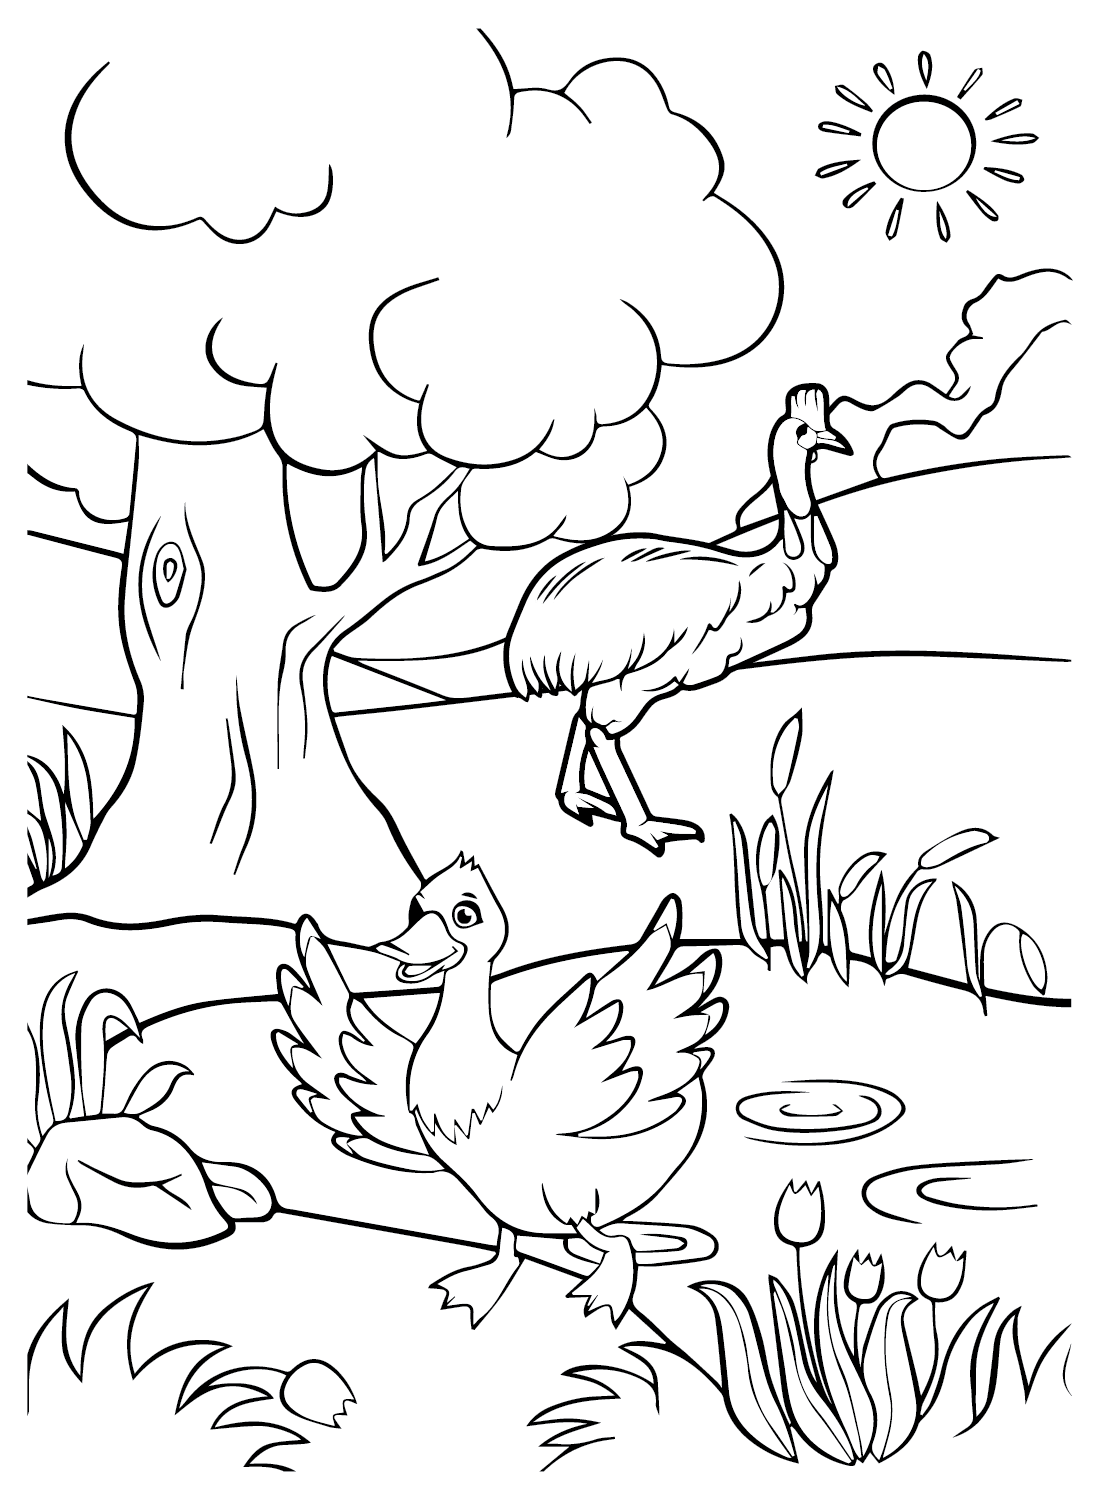 Cassowary and Duck Coloring Page from Cassowary